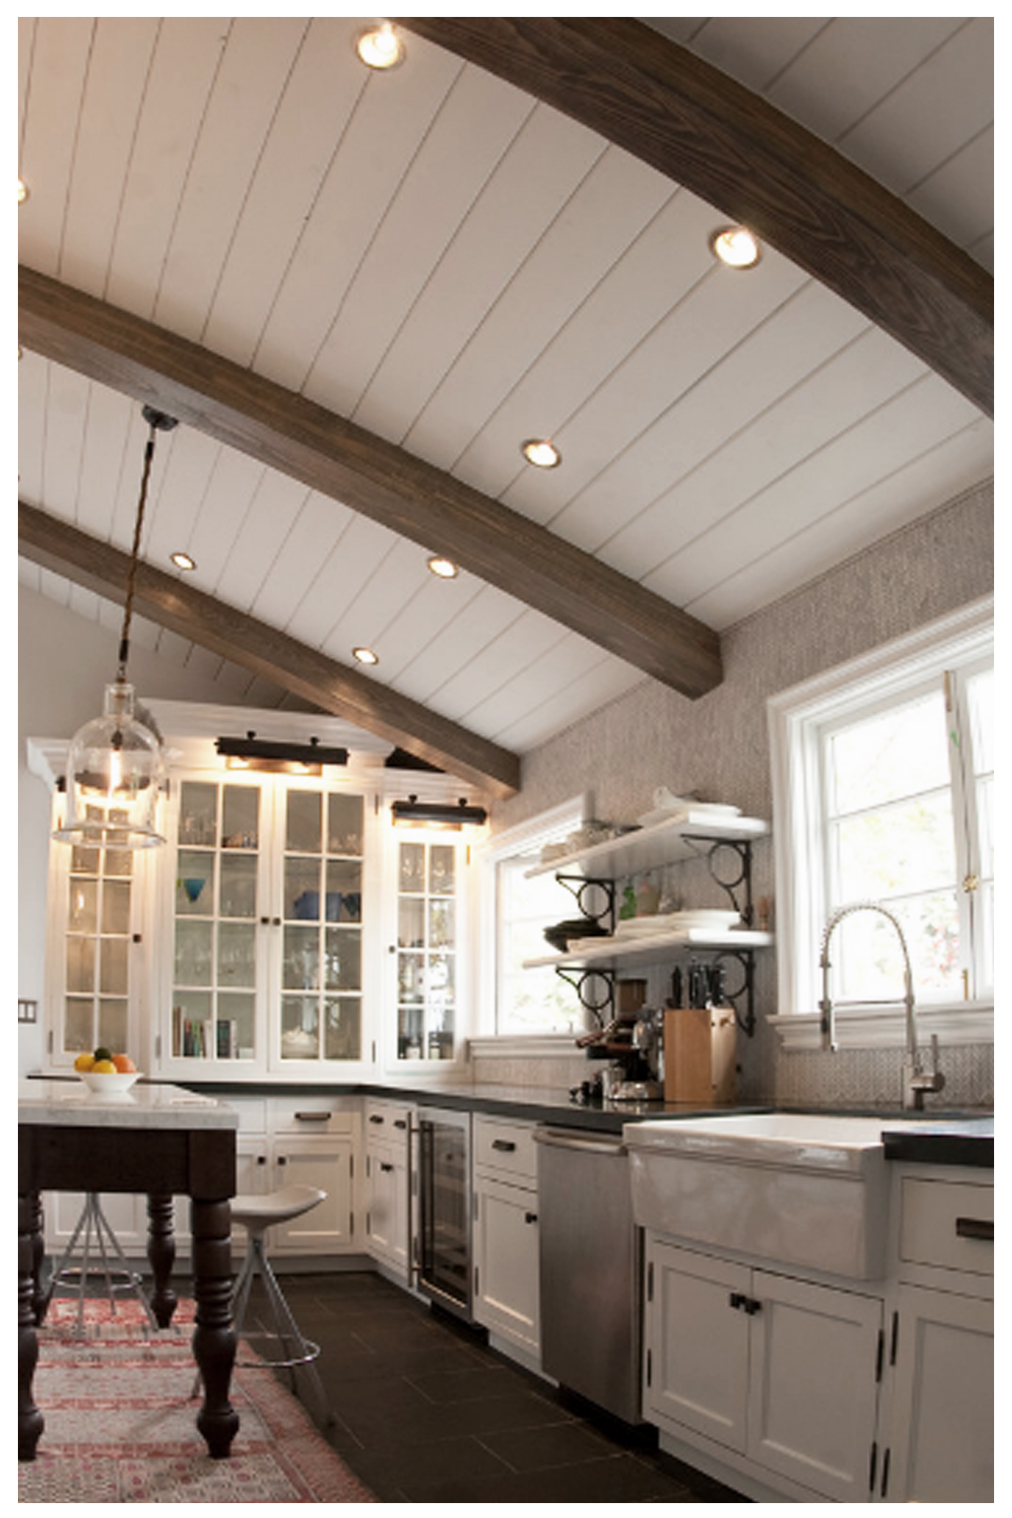 kitchen ceiling ideas pictures